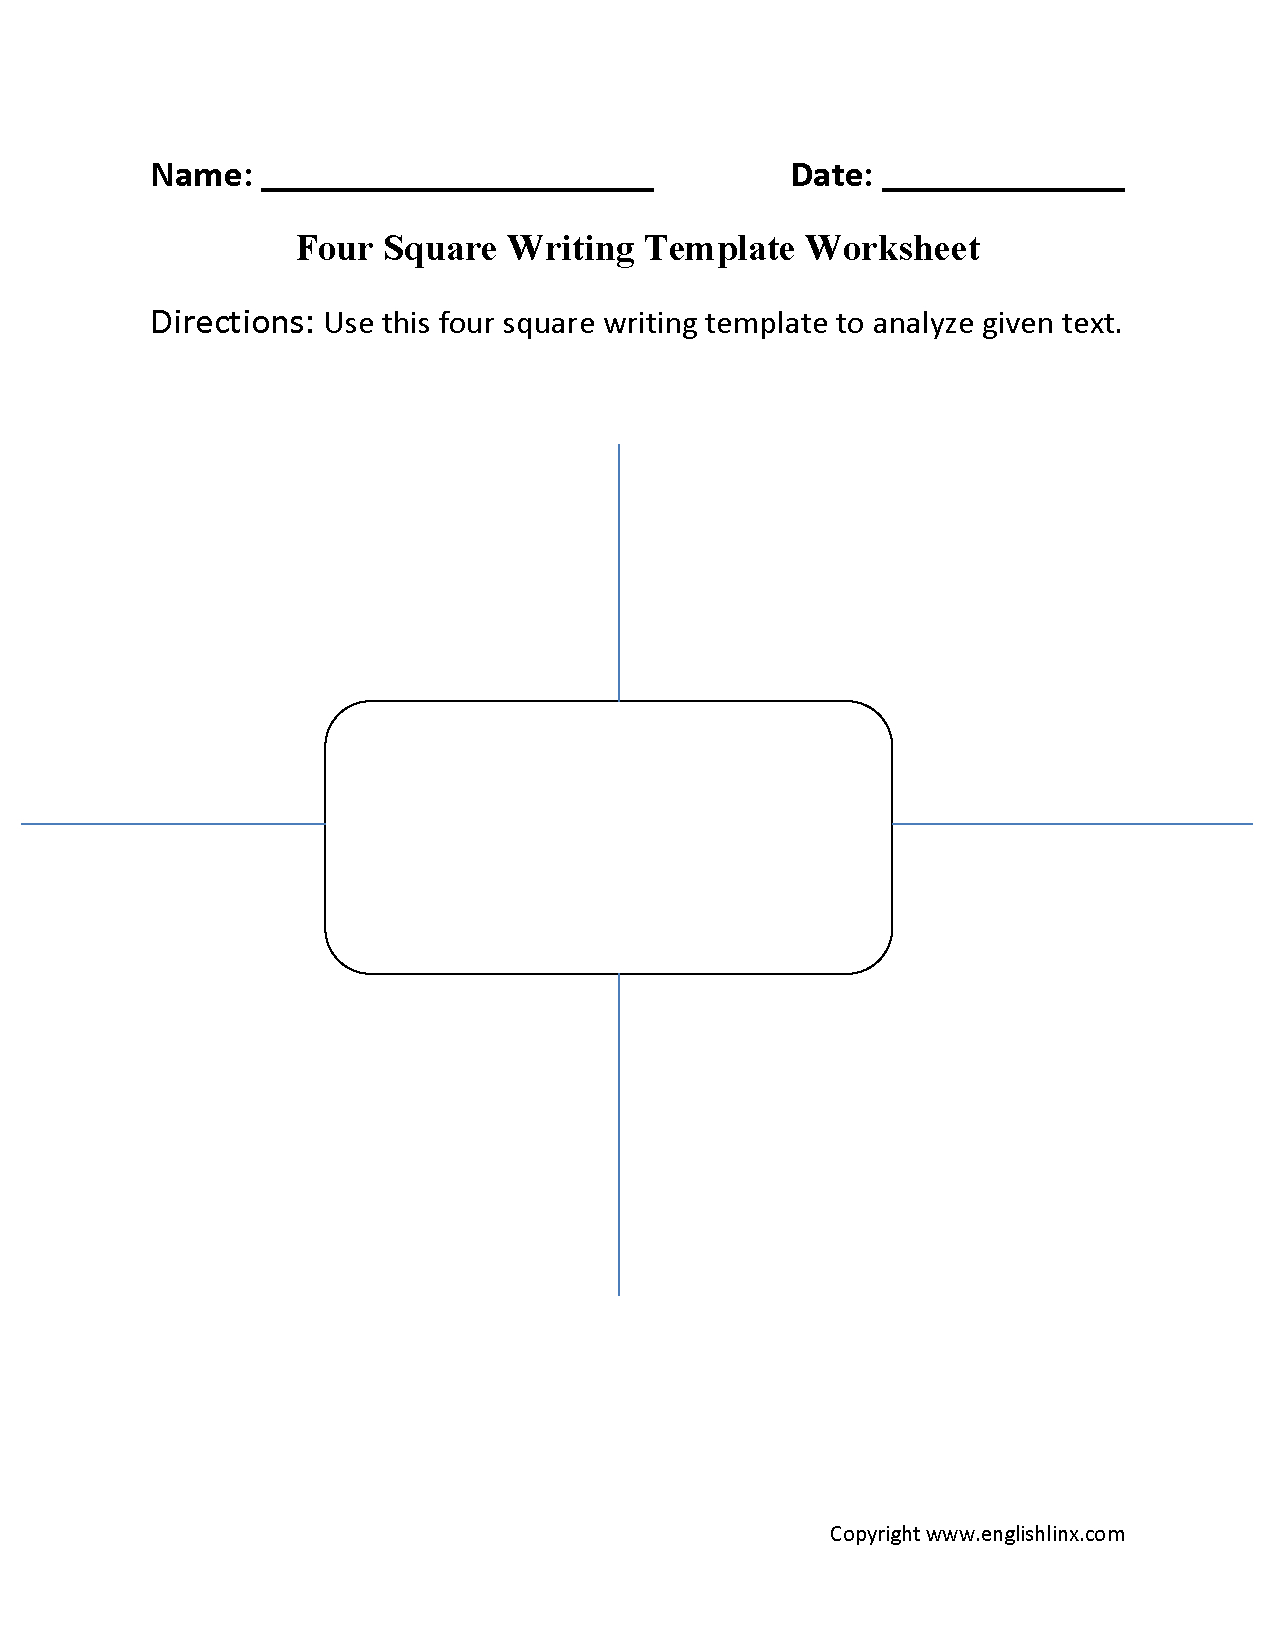 Writing Template Worksheets | Four Square Writing Template Within Blank Four Square Writing Template